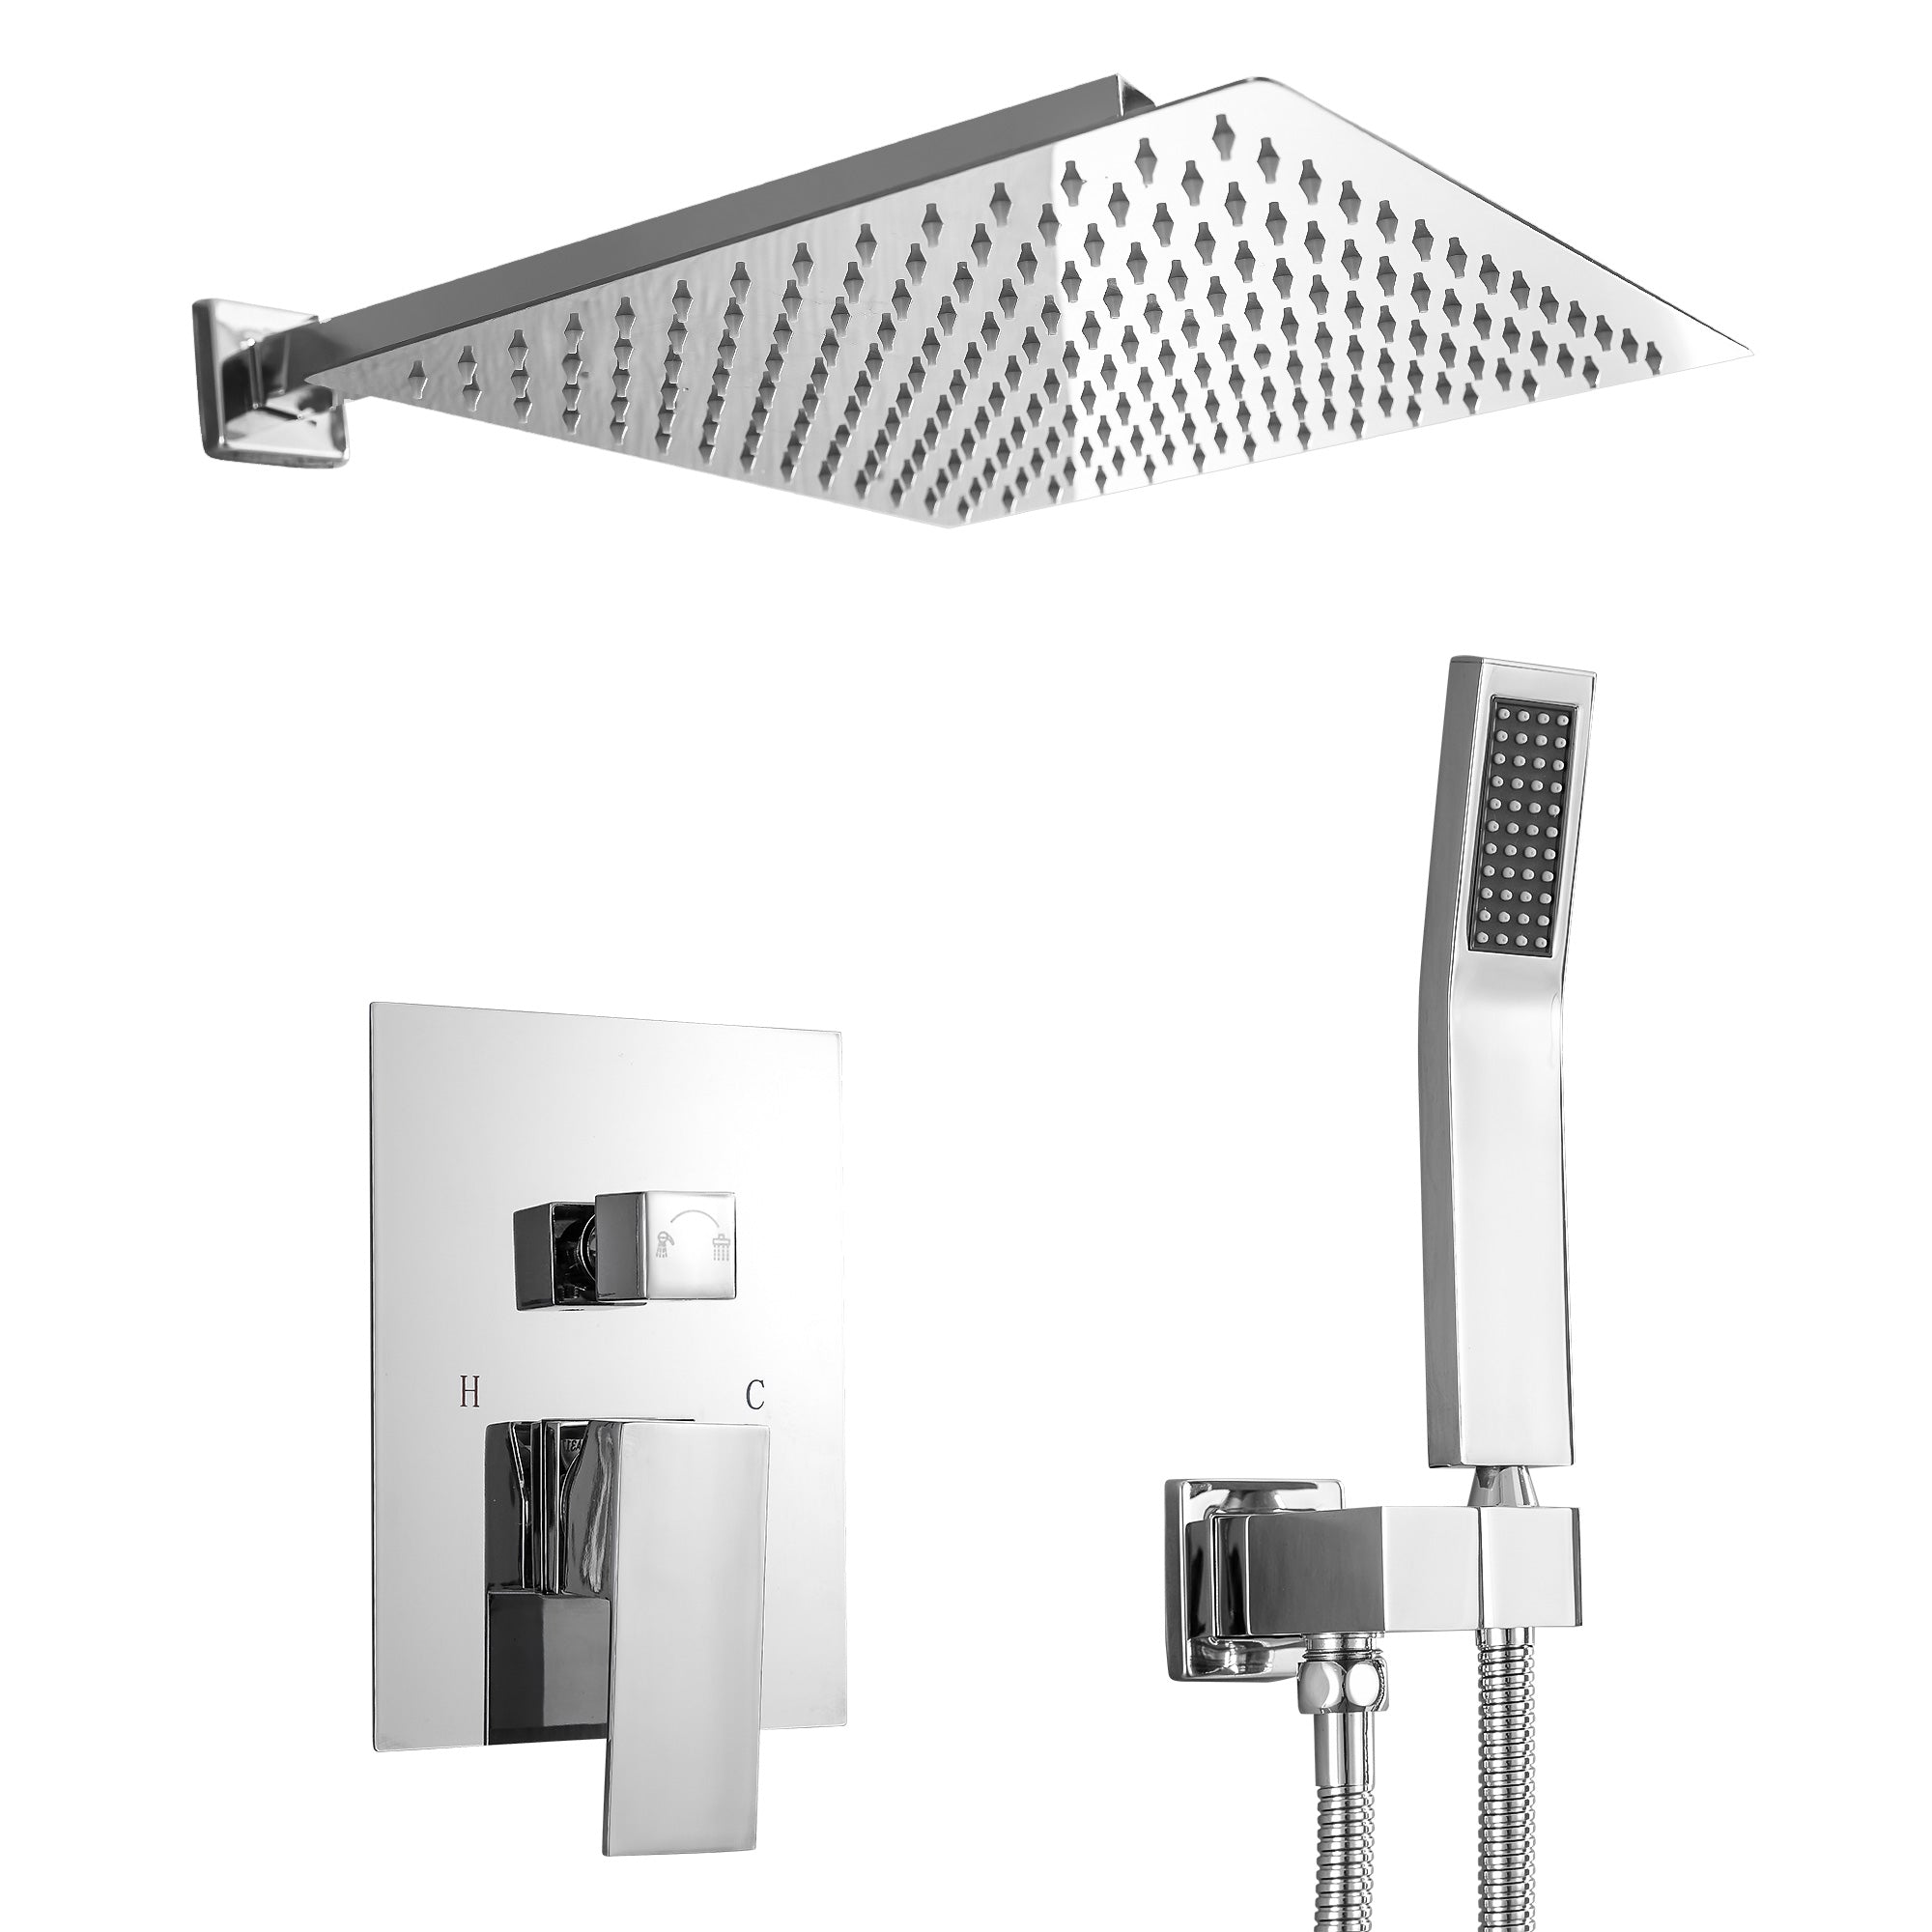 Lordear 10 Inch Wall Mounted Shower System with Chrome Finish - Stainless Steel Shower Head and Handheld | Big Deal, Shower Faucets & System, Shower Head with Handheld | Lordear